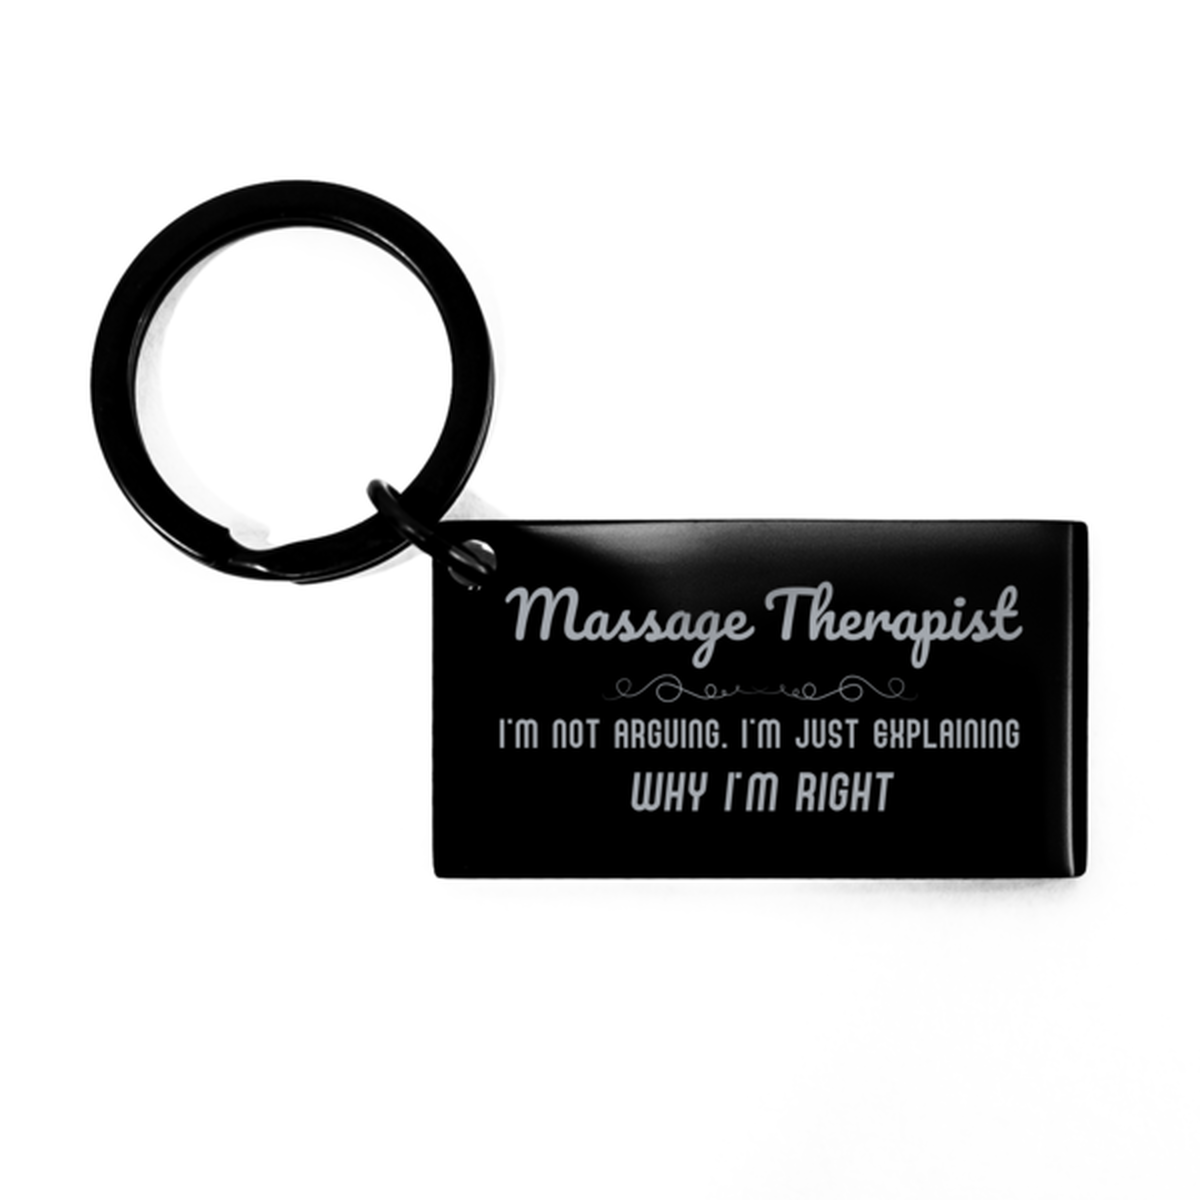 Massage Therapist I'm not Arguing. I'm Just Explaining Why I'm RIGHT Keychain, Funny Saying Quote Massage Therapist Gifts For Massage Therapist Graduation Birthday Christmas Gifts for Men Women Coworker